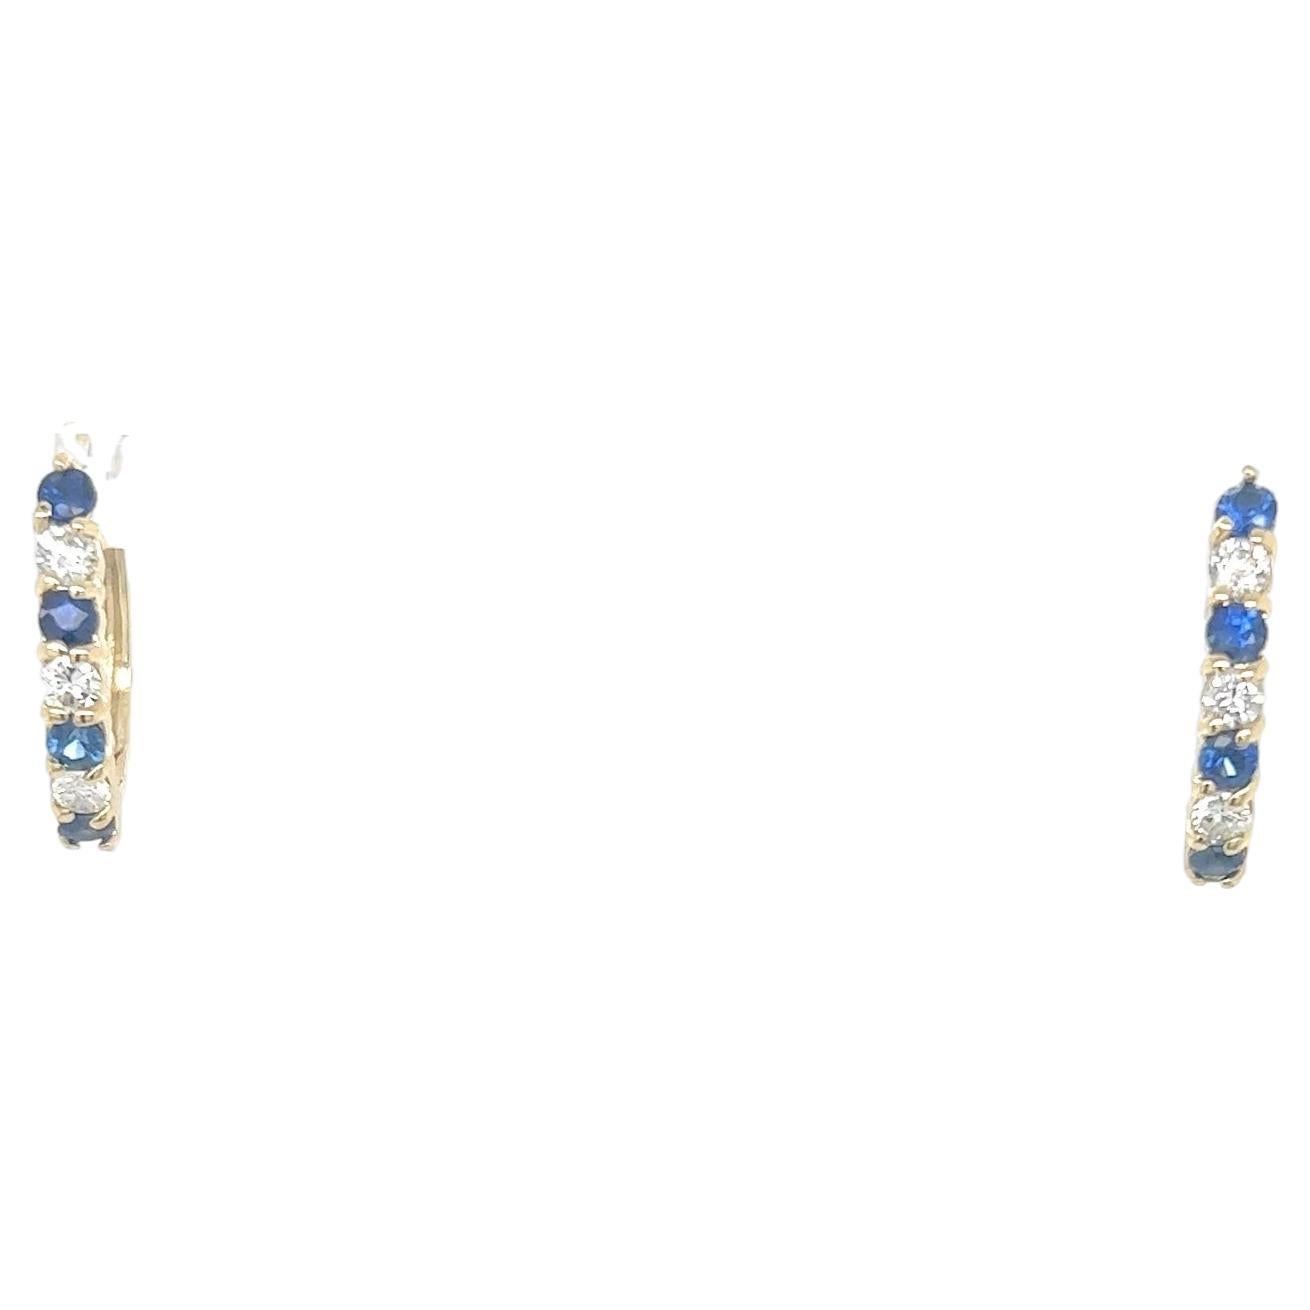 These beautiful earrings have Natural Round Cut Sapphires that weigh 0.70 carats and have Natural Round Cut Diamonds that weigh 0.36 Carats. The total carat weight of the earrings are 1.06 carats. 

They are set in 14 Karat Yellow Gold and weigh